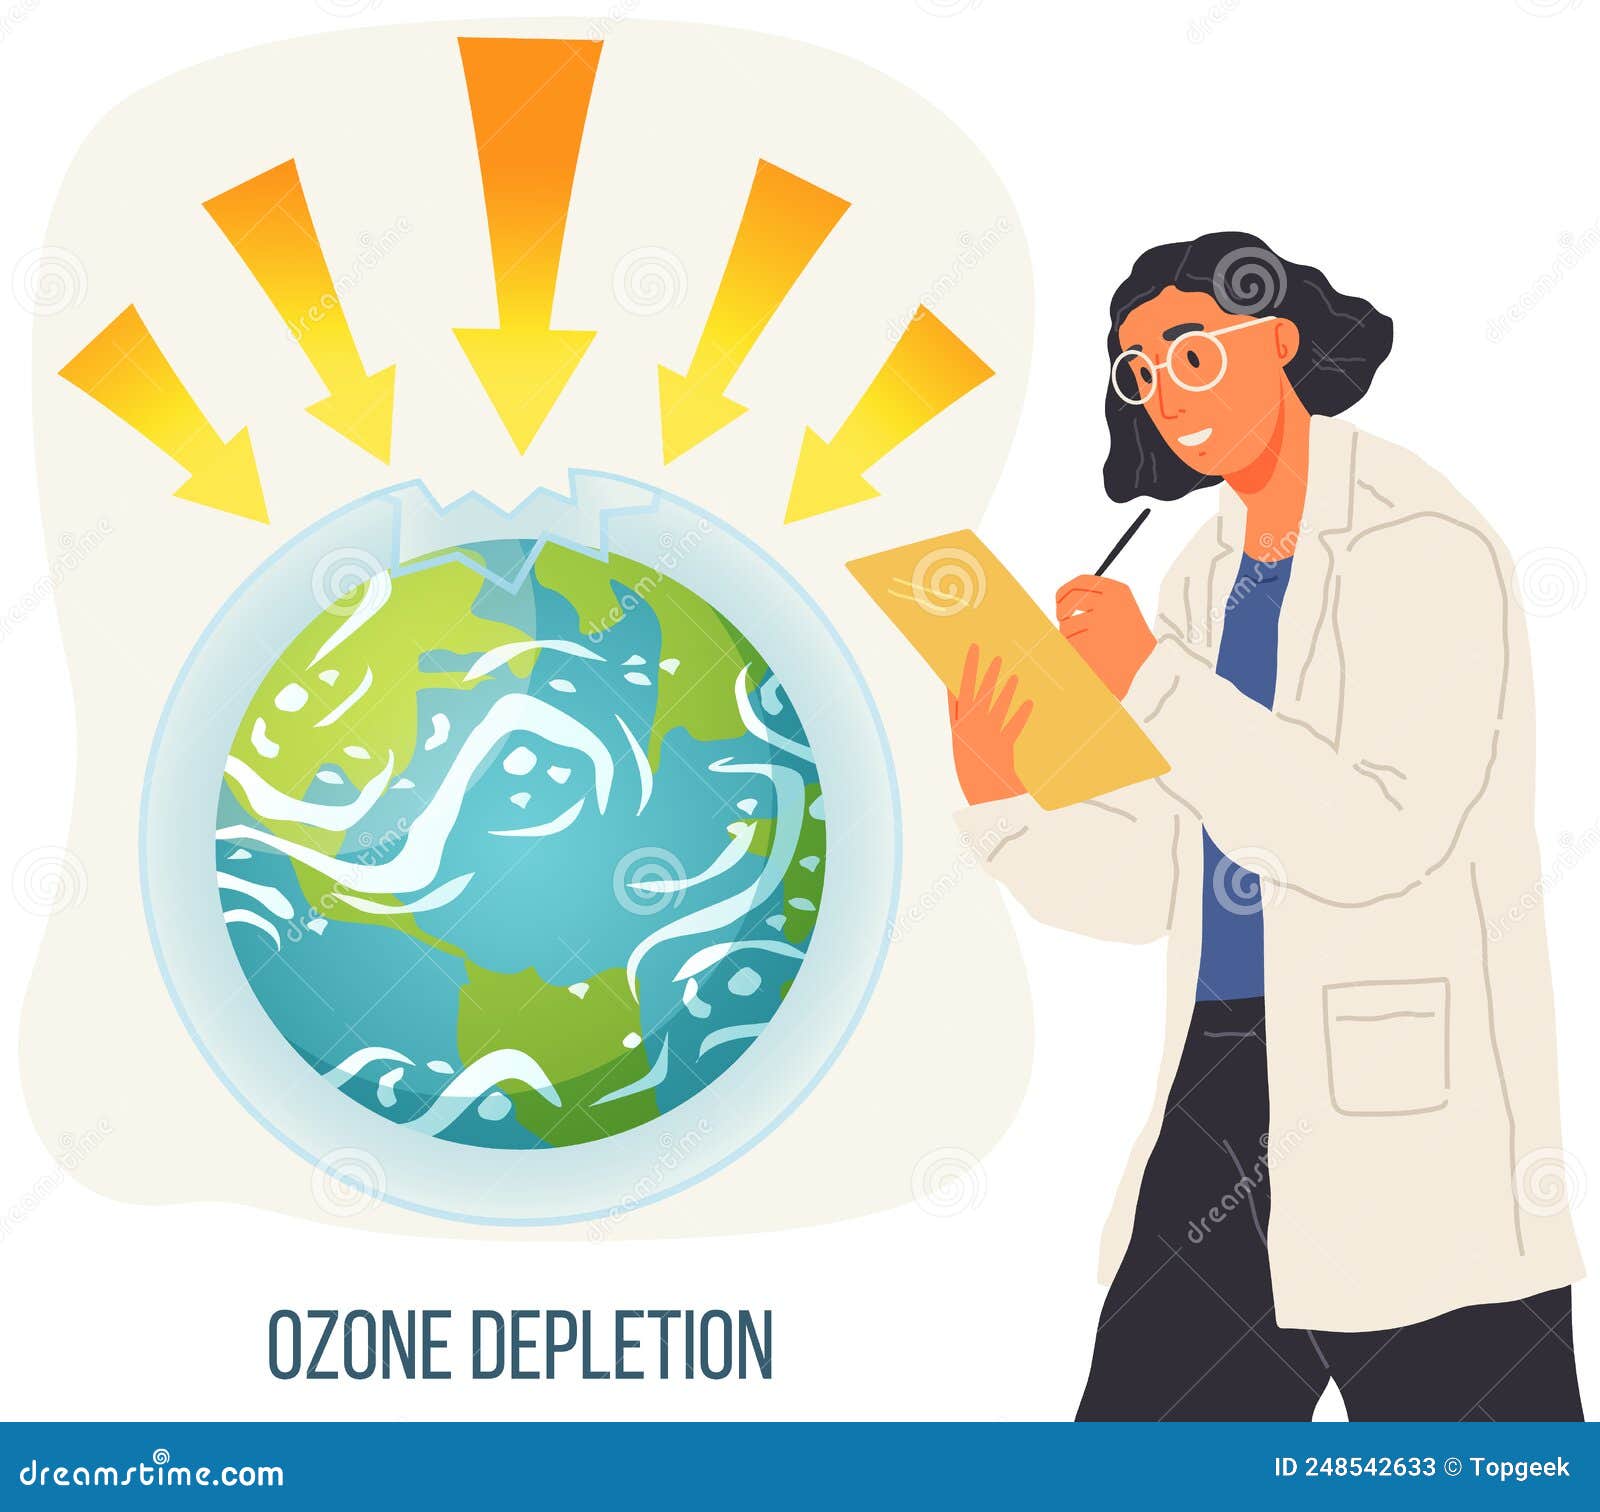 Ozone Depletion Mind Map, Concept For Presentations And Reports Royalty  Free SVG, Cliparts, Vectors, and Stock Illustration. Image 171642865.